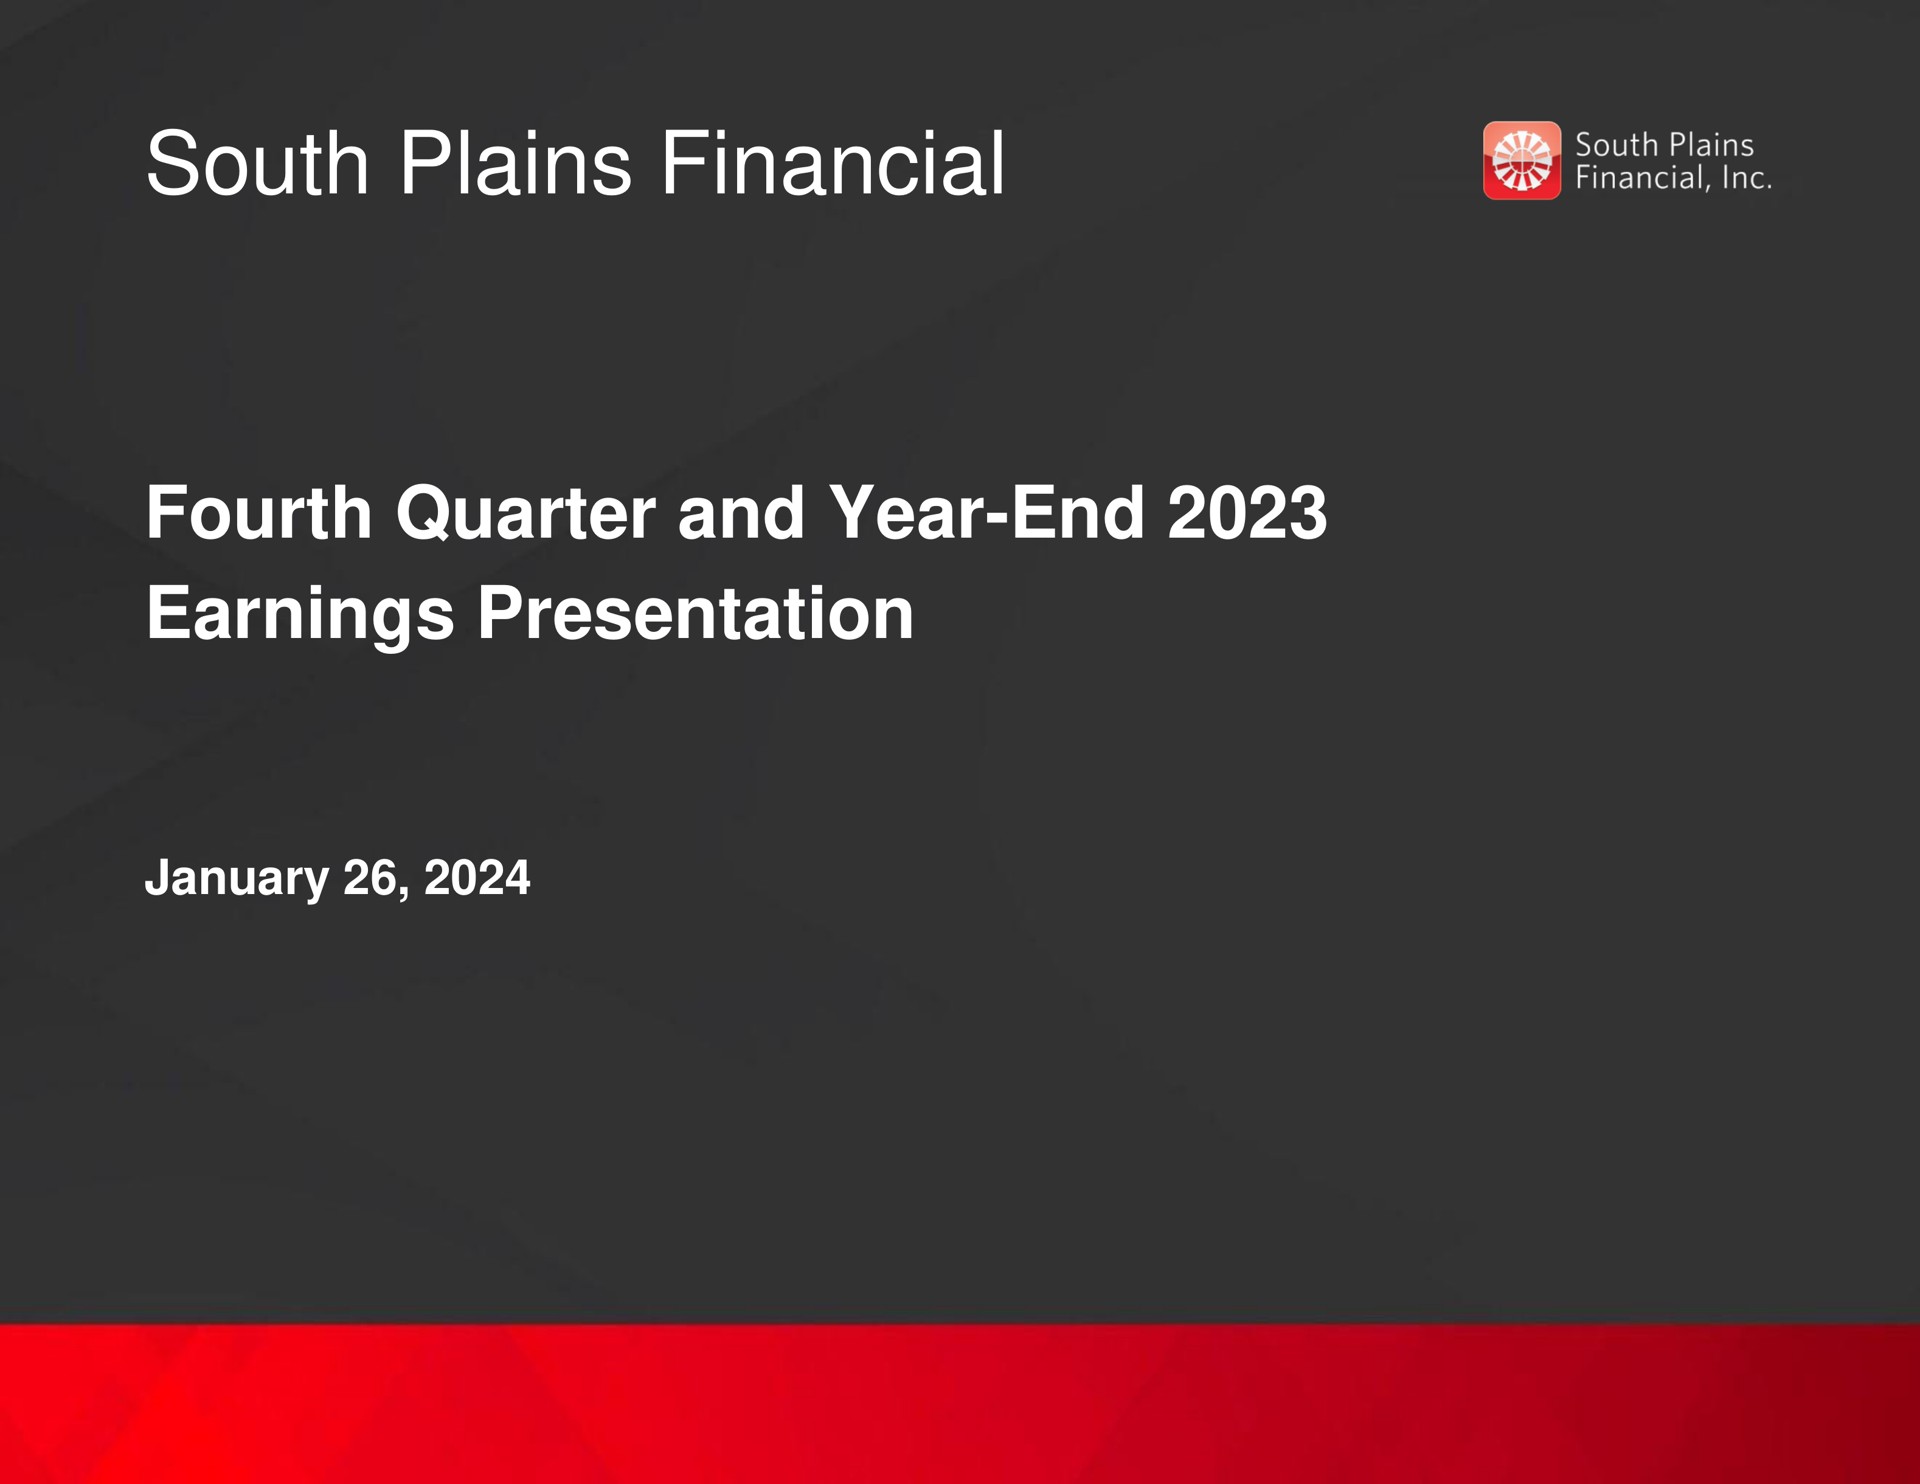 south plains financial fourth quarter and year end earnings presentation | South Plains Financial